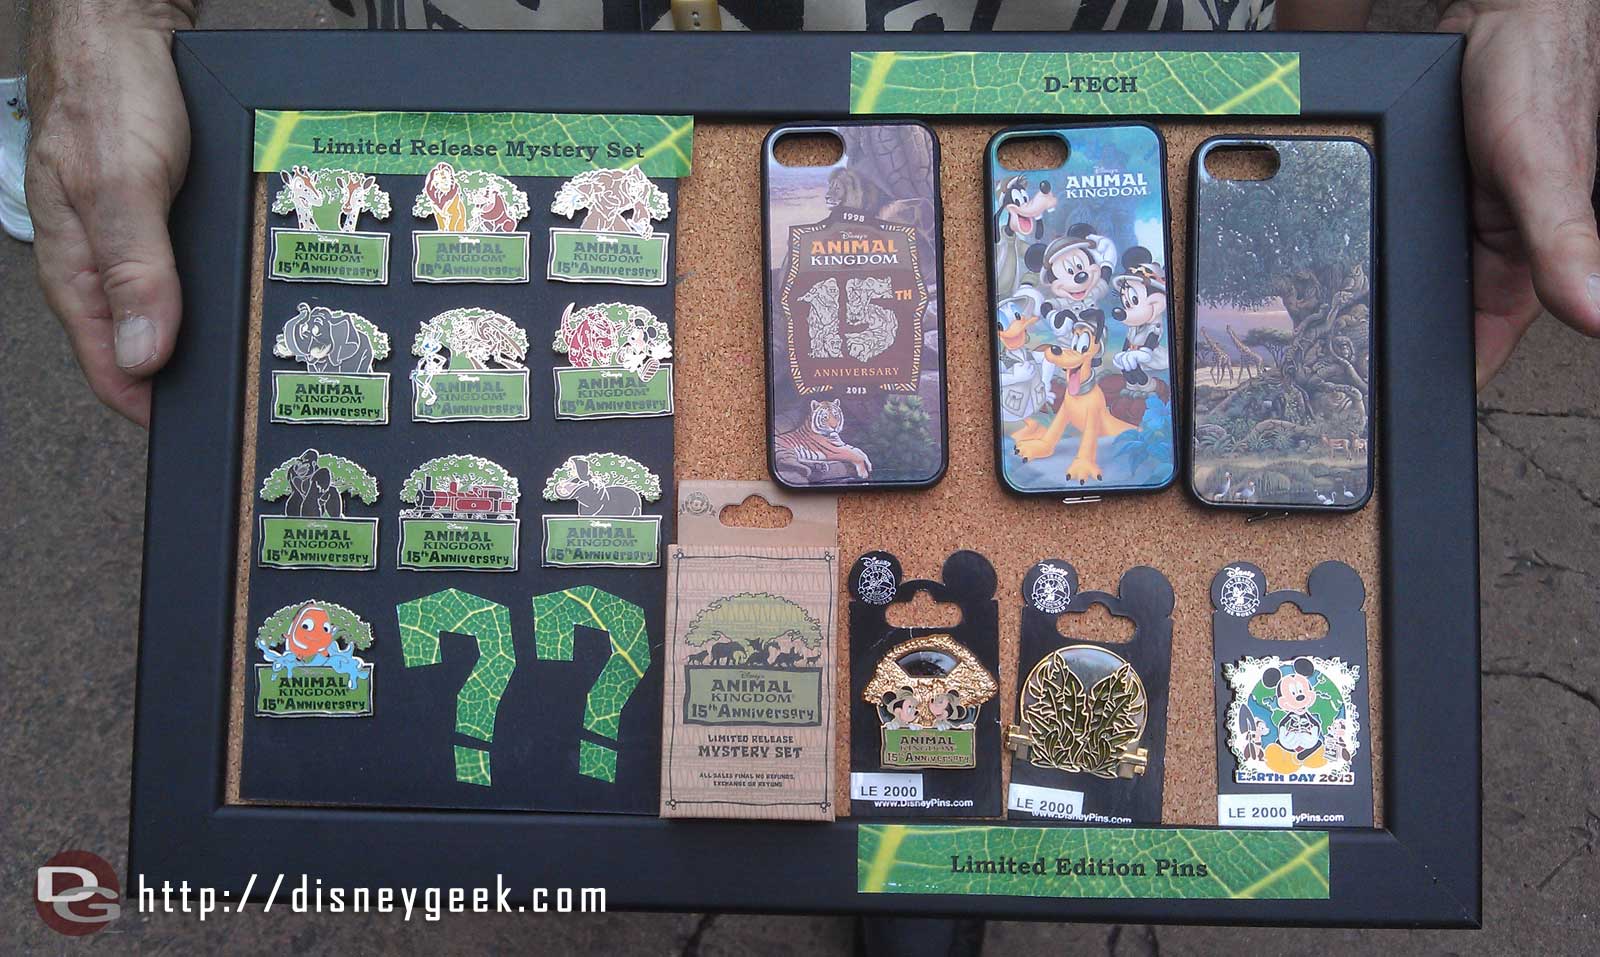 Some of the DAK15 merchandisepins and iPhone cases that iswas available